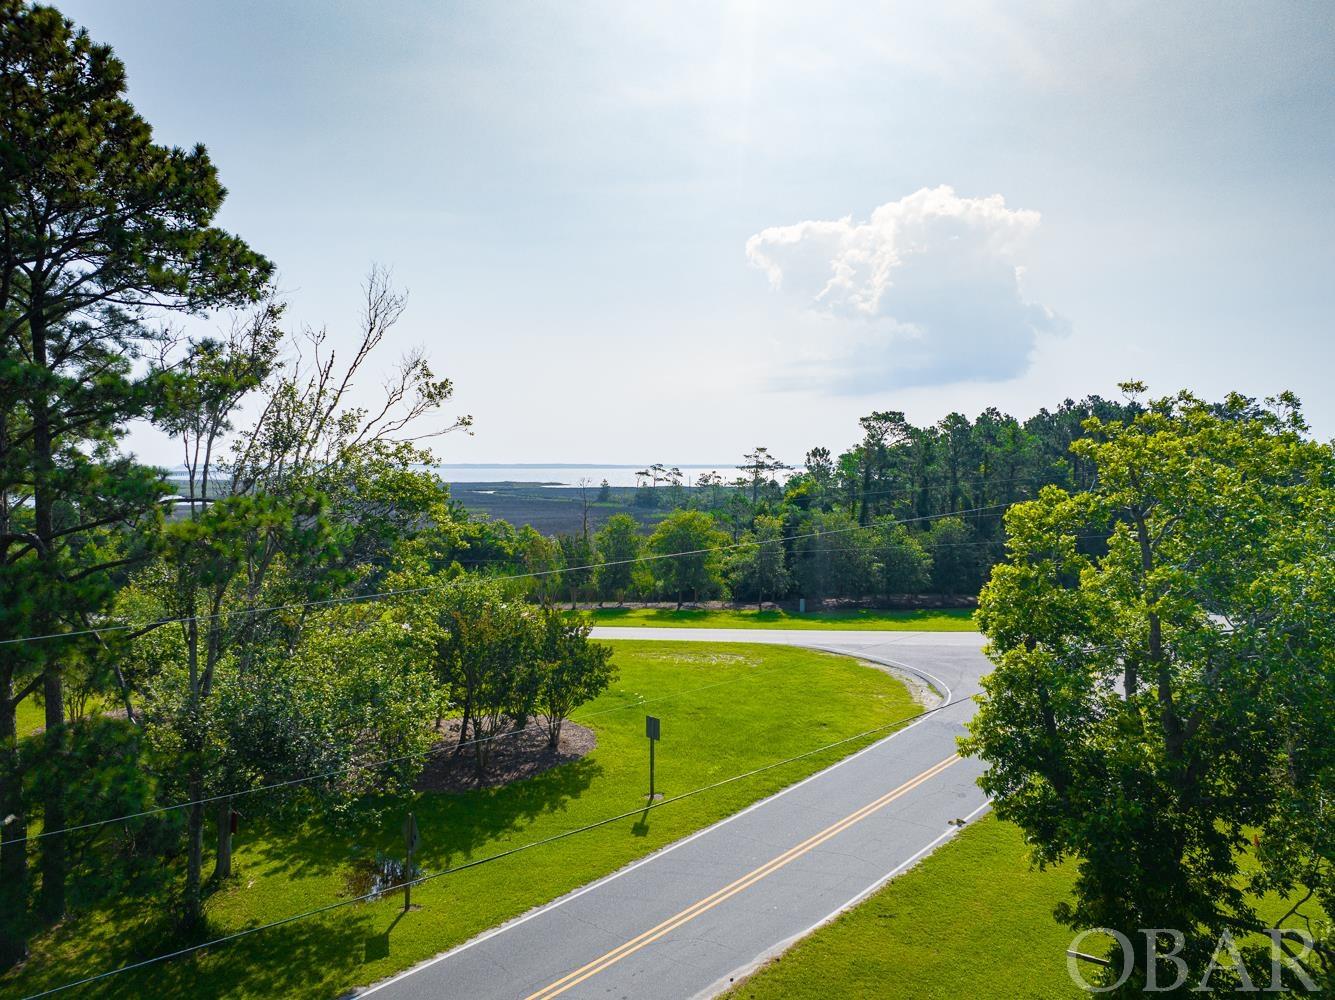 17 Mashoes Road, Manns Harbor, NC 27953, 2 Bedrooms Bedrooms, ,2 BathroomsBathrooms,Residential,For sale,Mashoes Road,122668